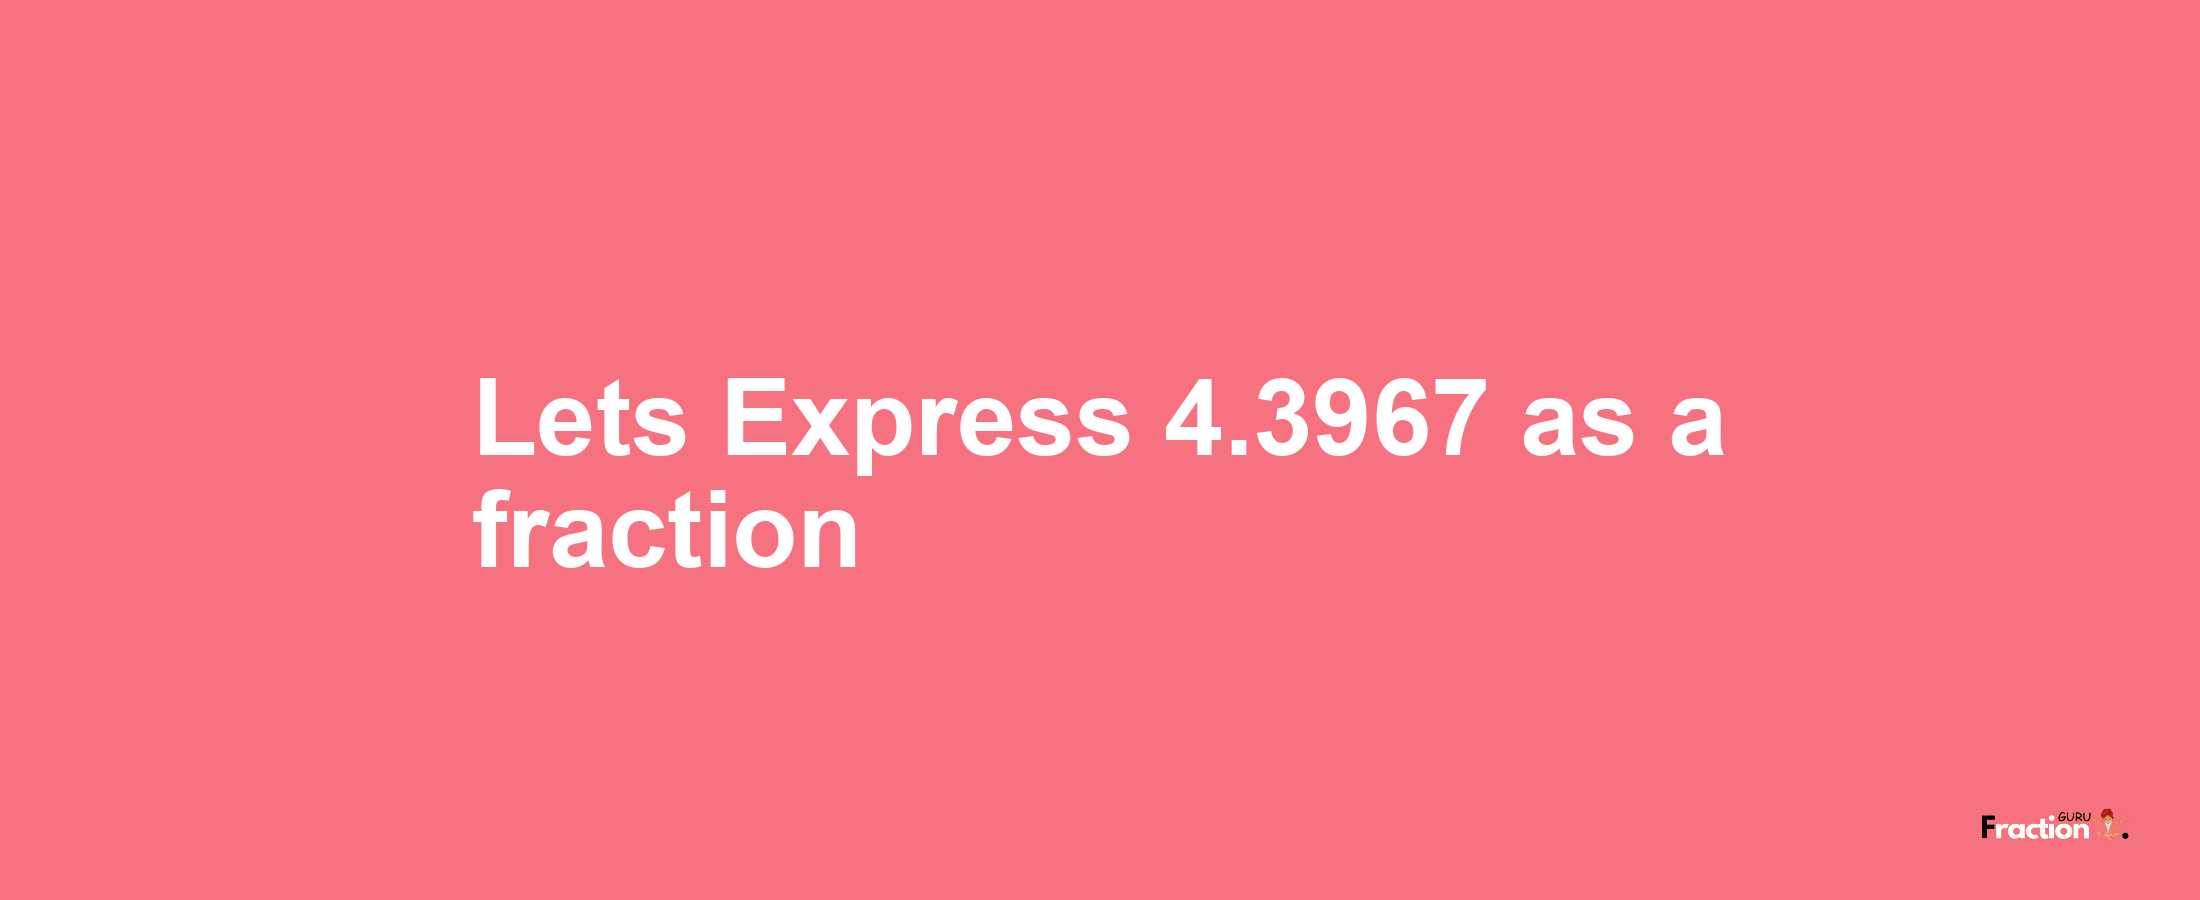 Lets Express 4.3967 as afraction